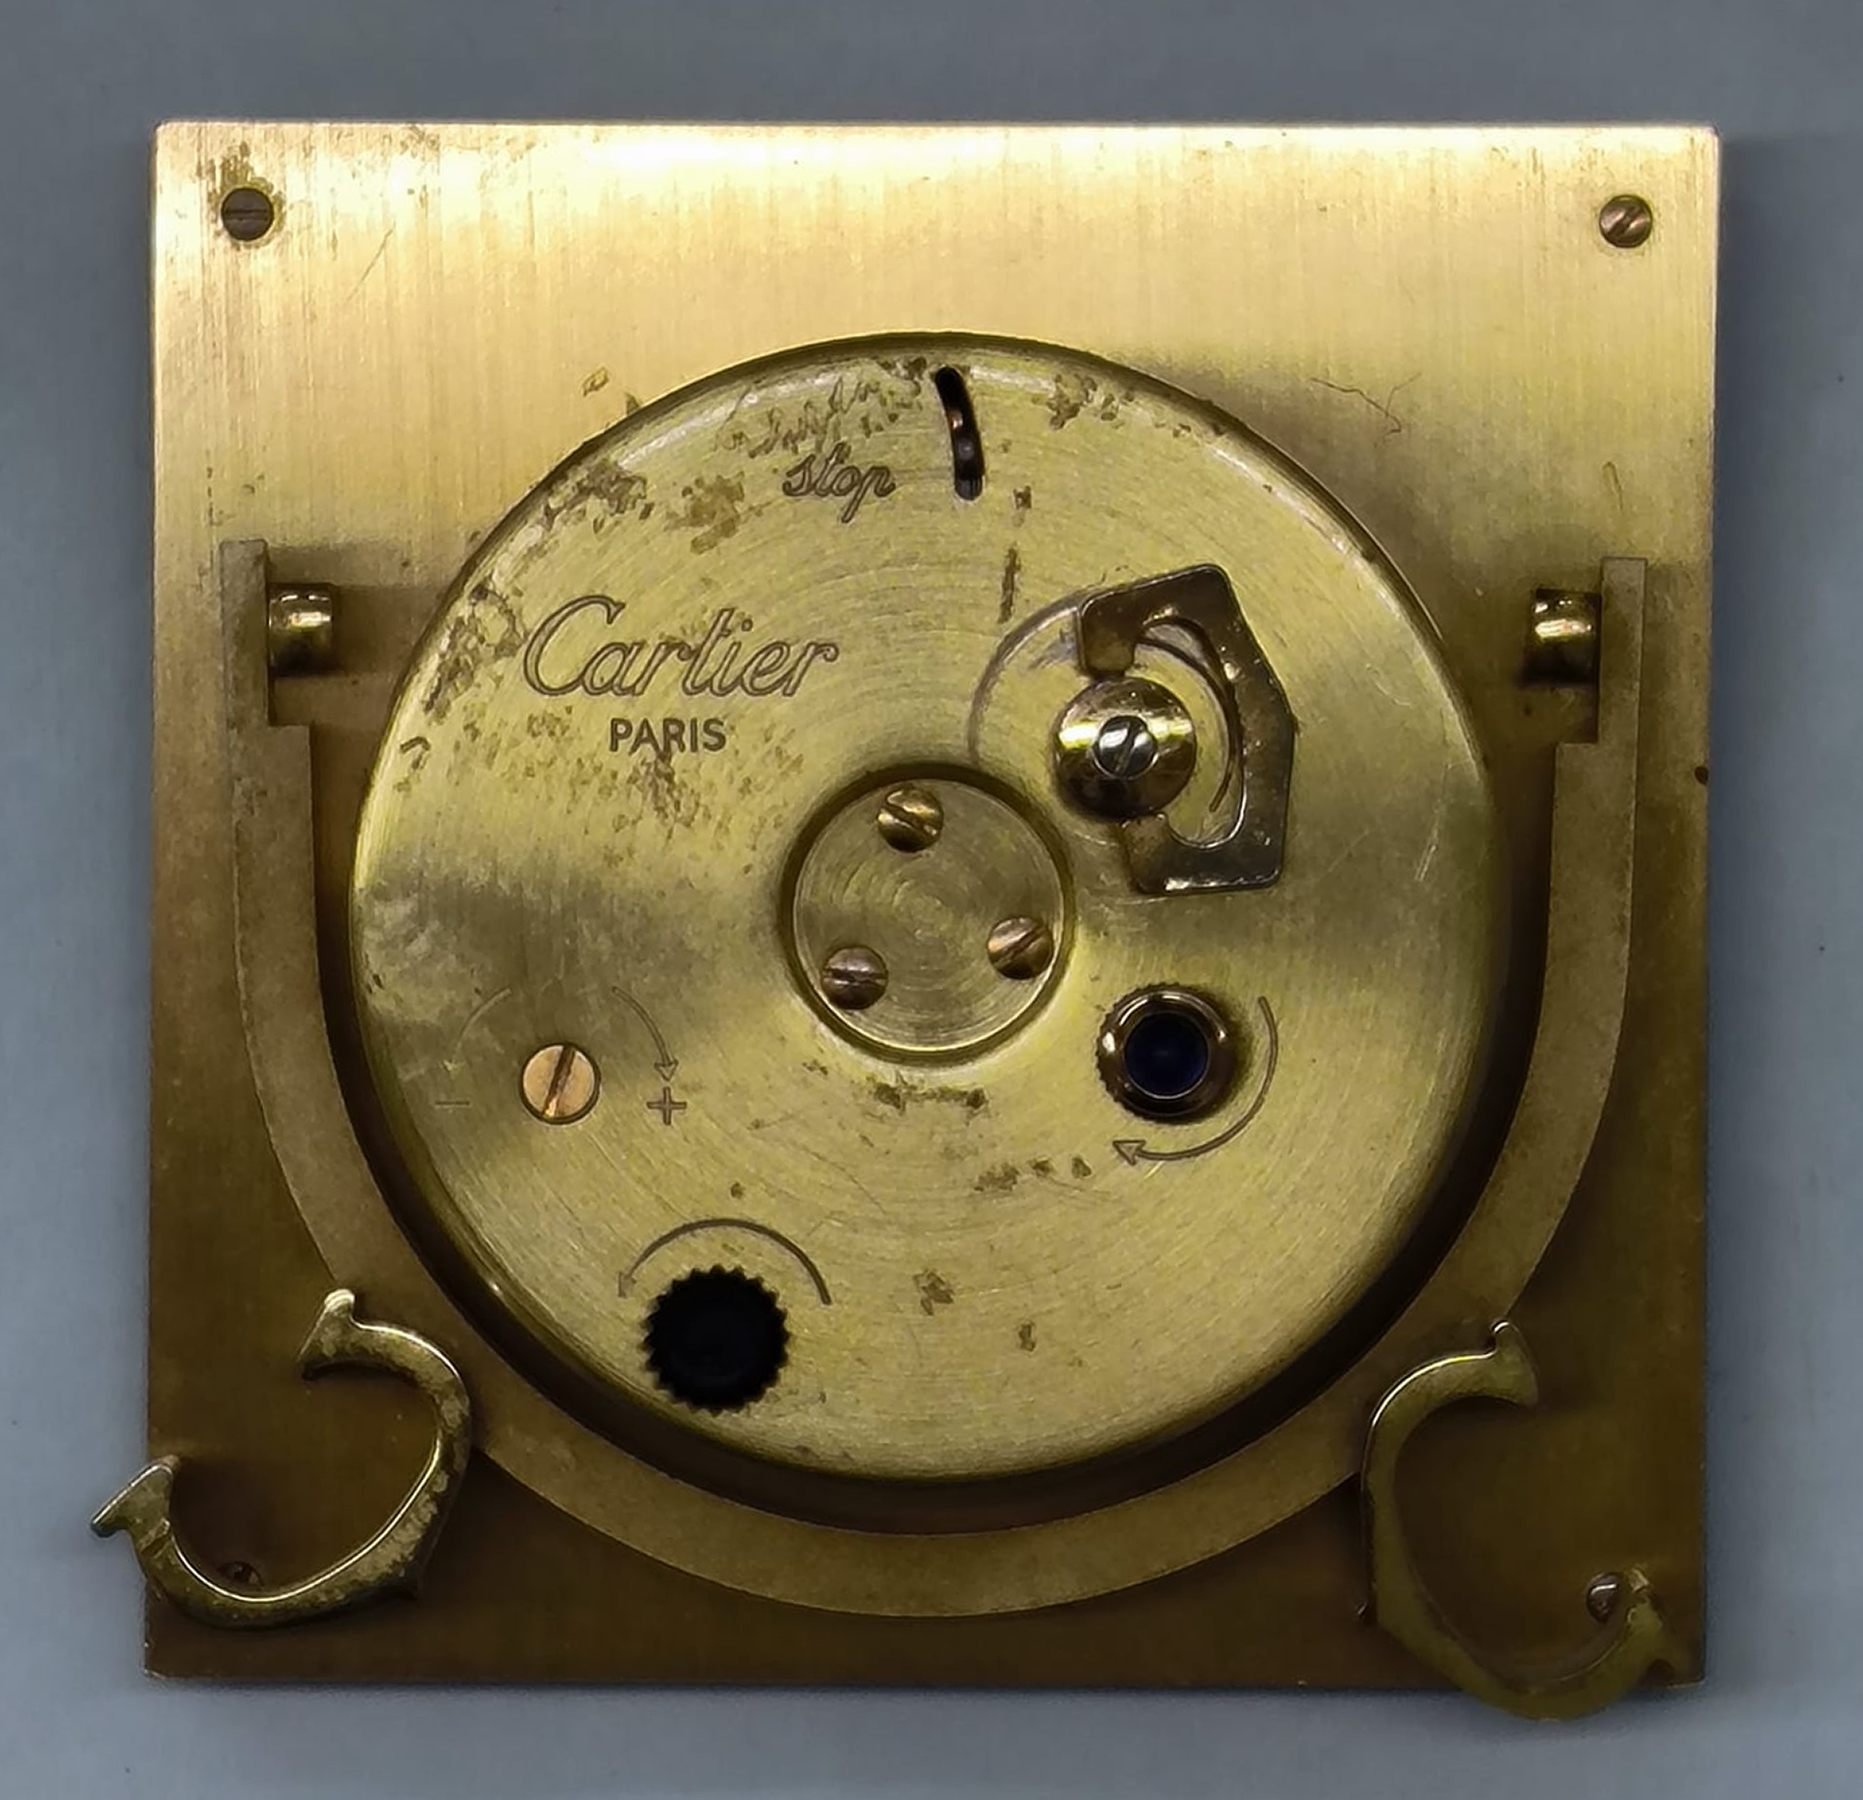 Square Cartier desktop clock, mechanical charge - Image 2 of 2